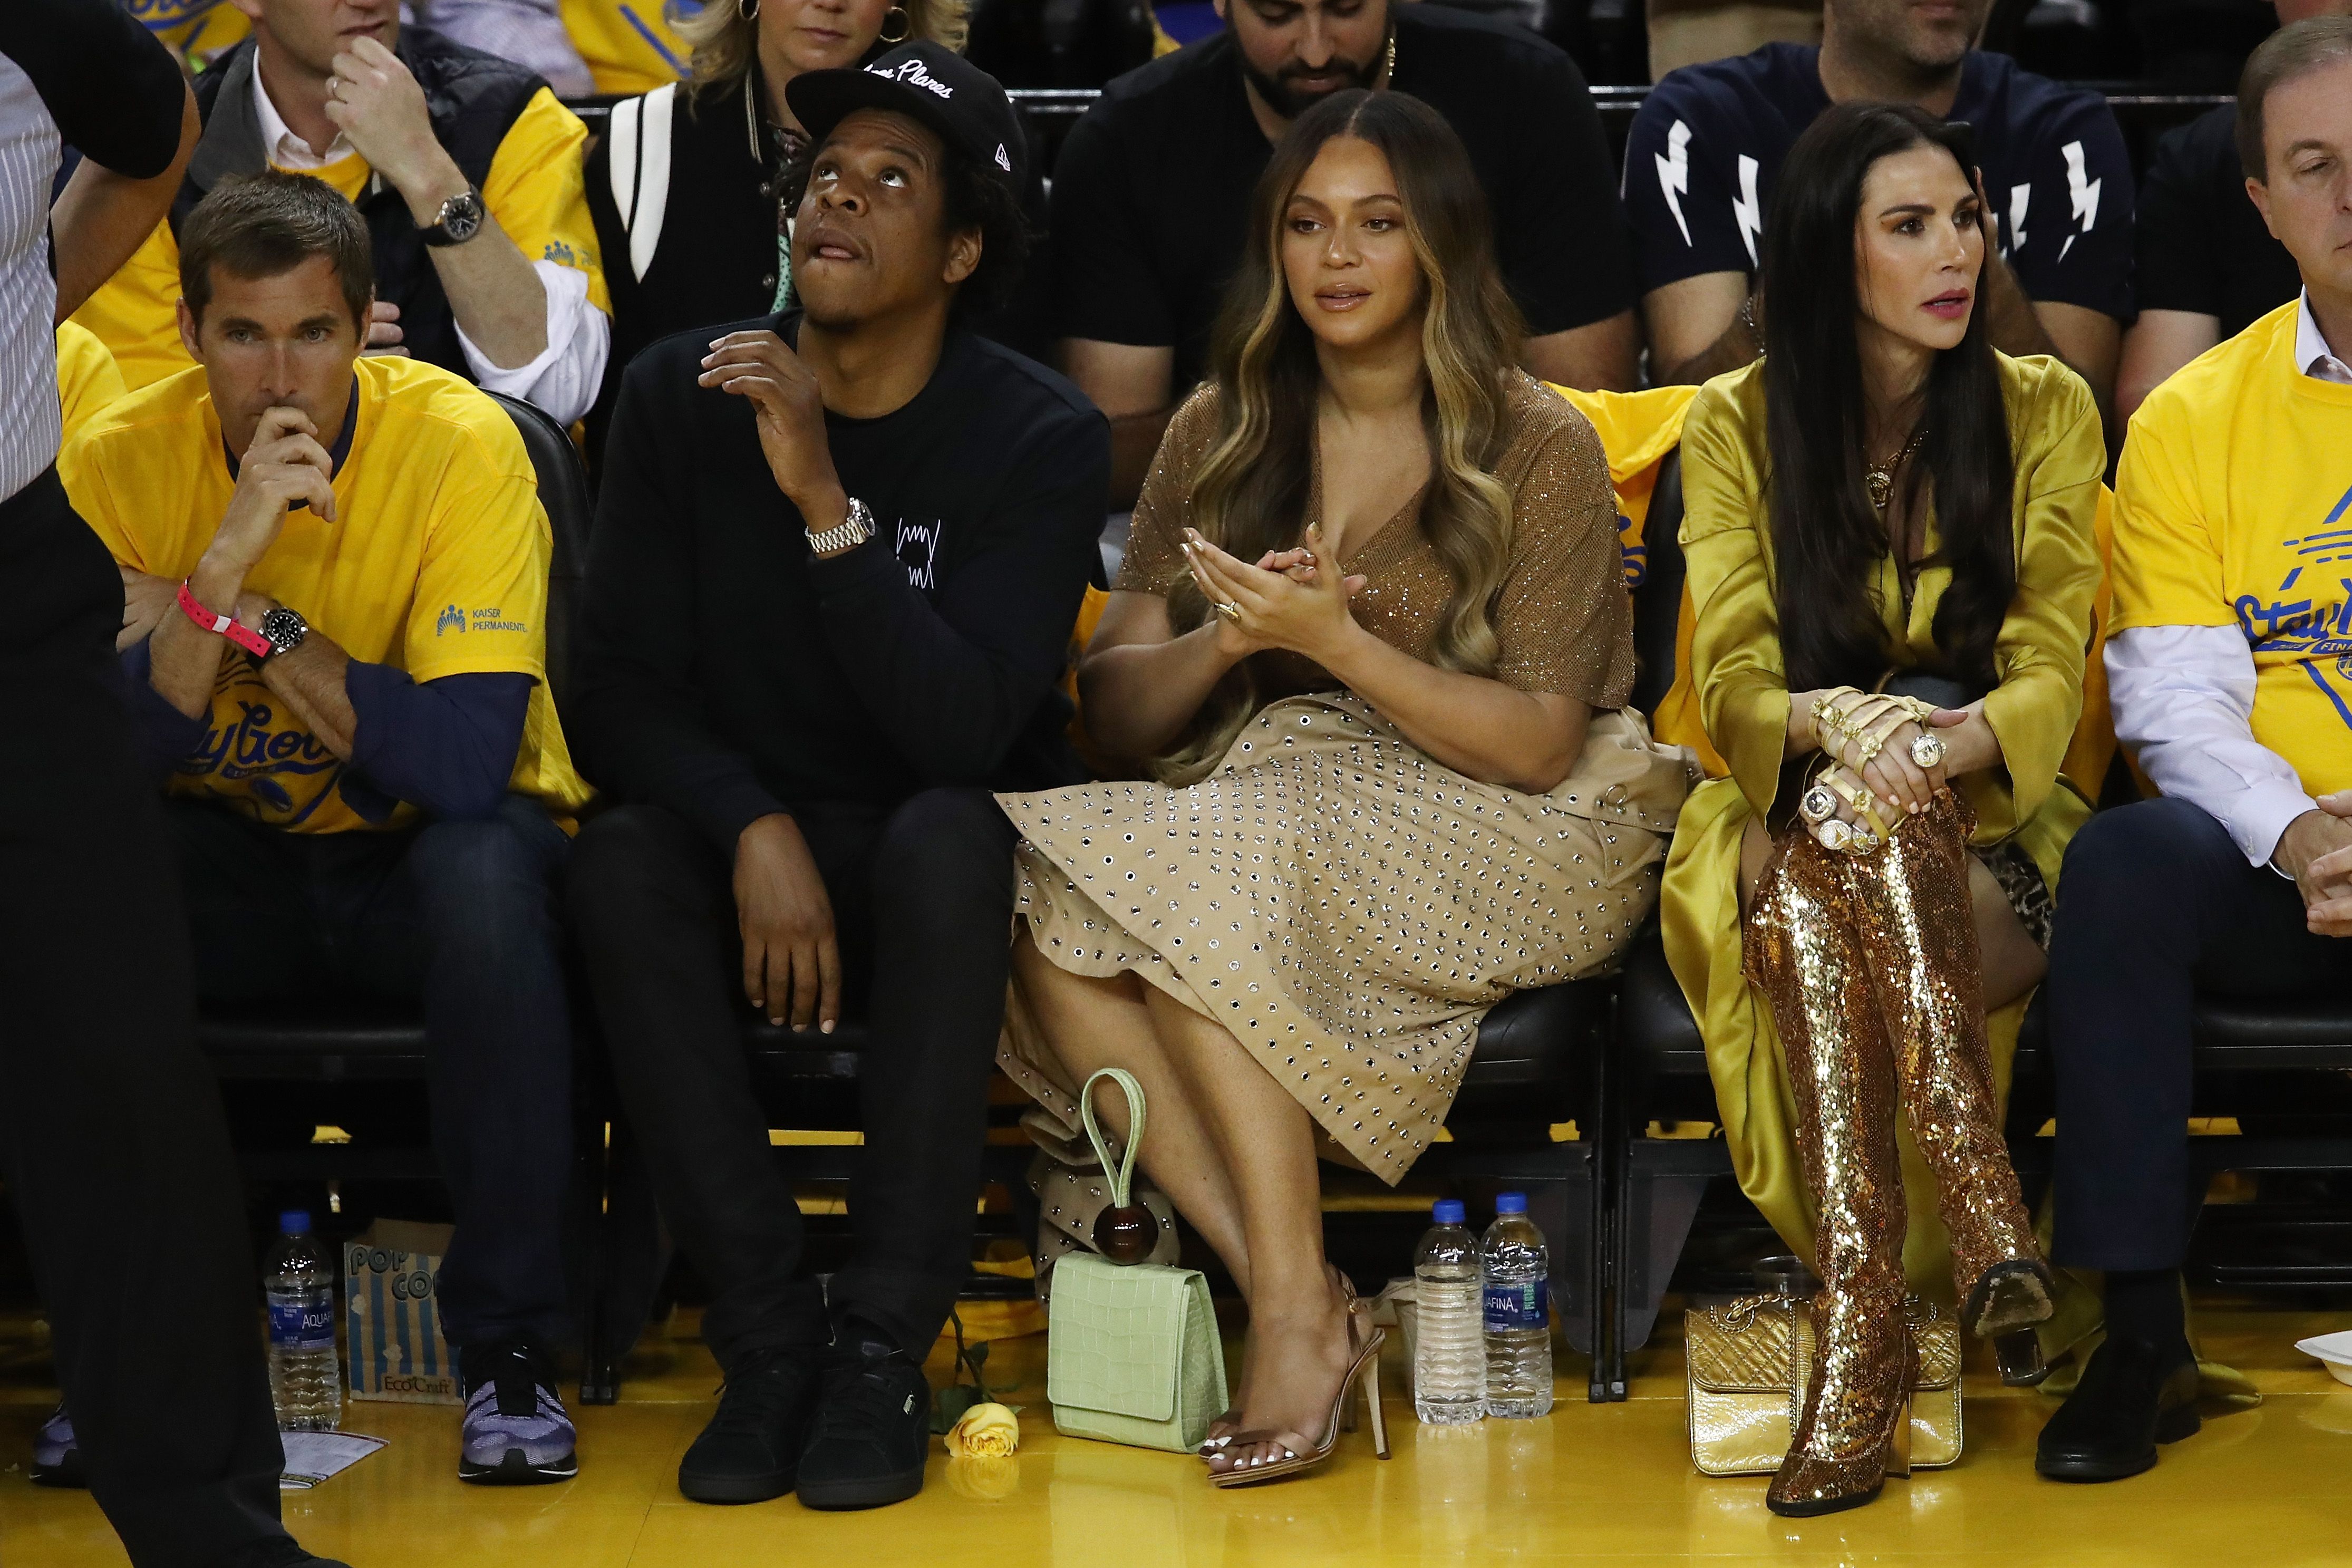 Beyoncé and Jay-Z Are the Latest Celebrities to Embrace the Game